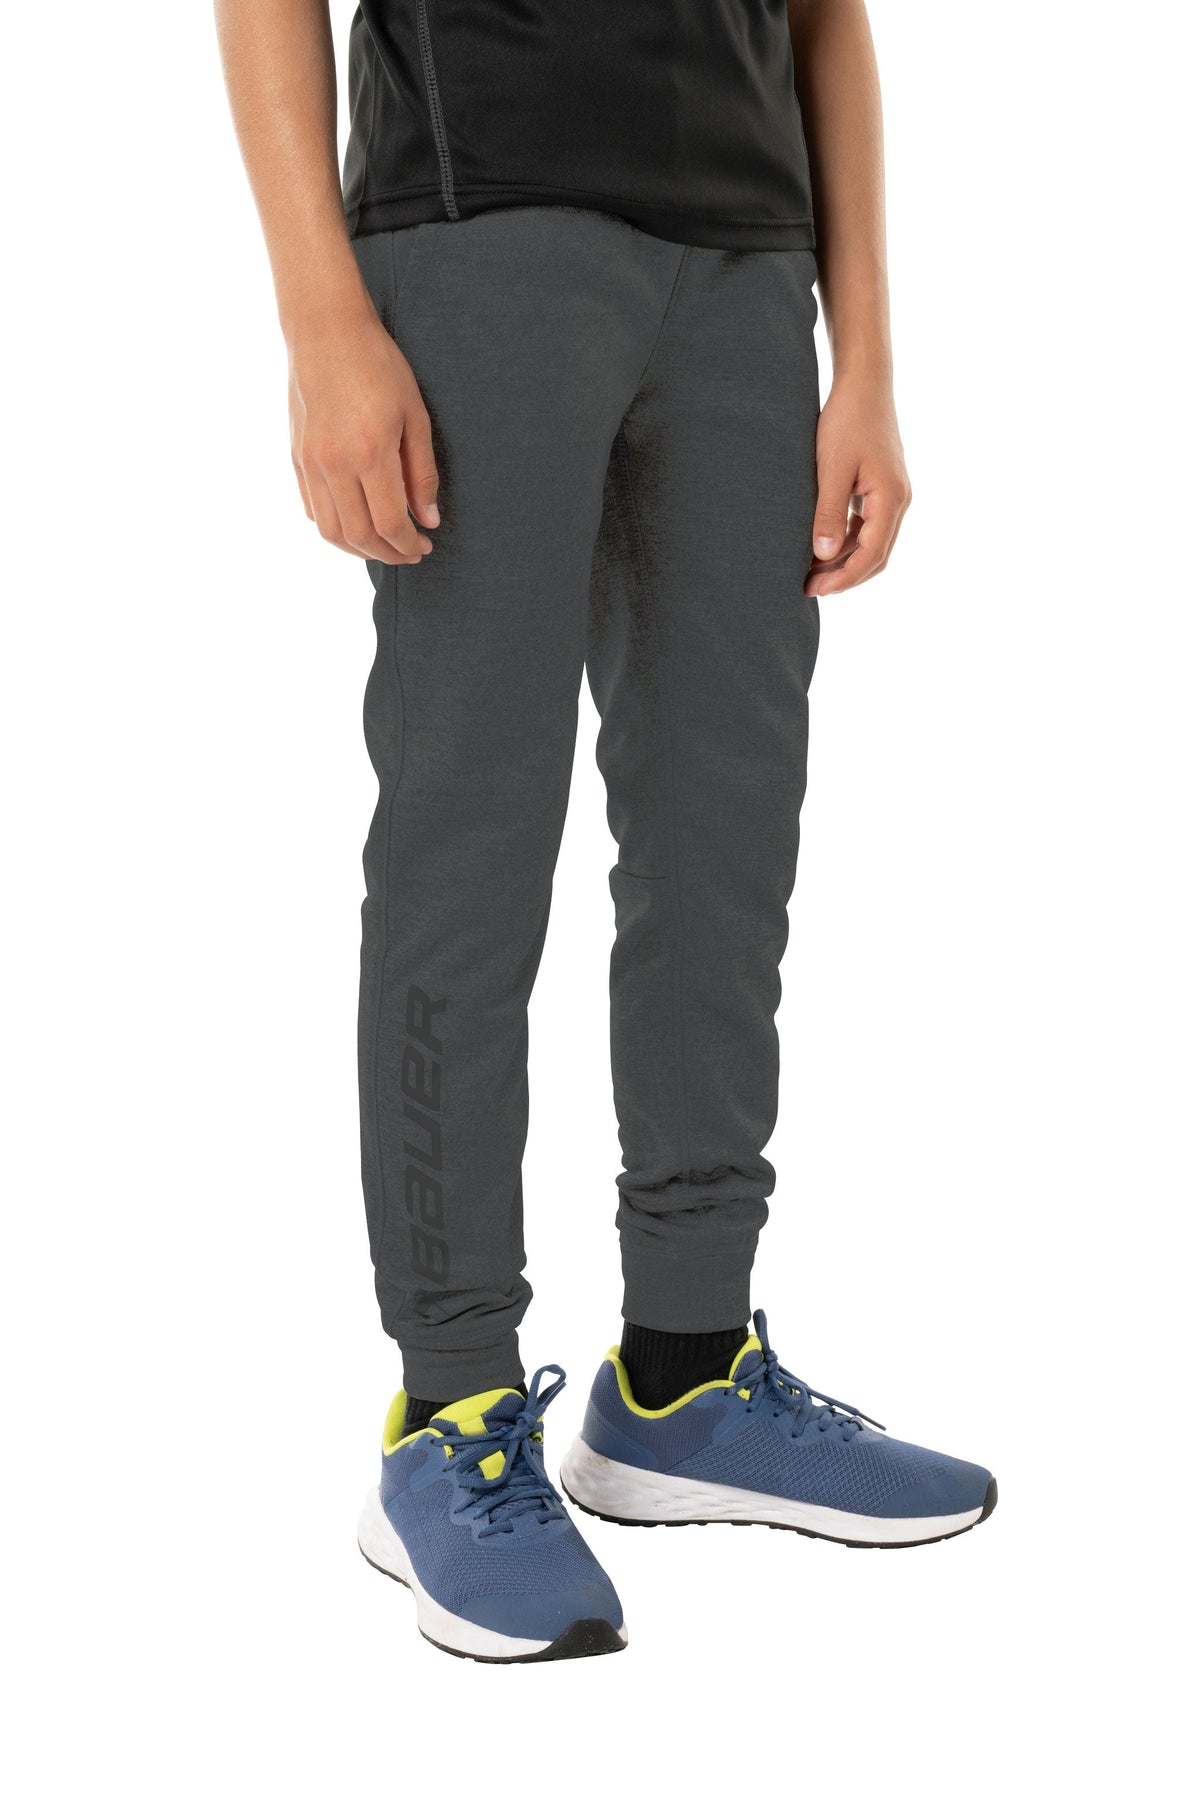 S23 Bauer Team Fleece Youth Joggers